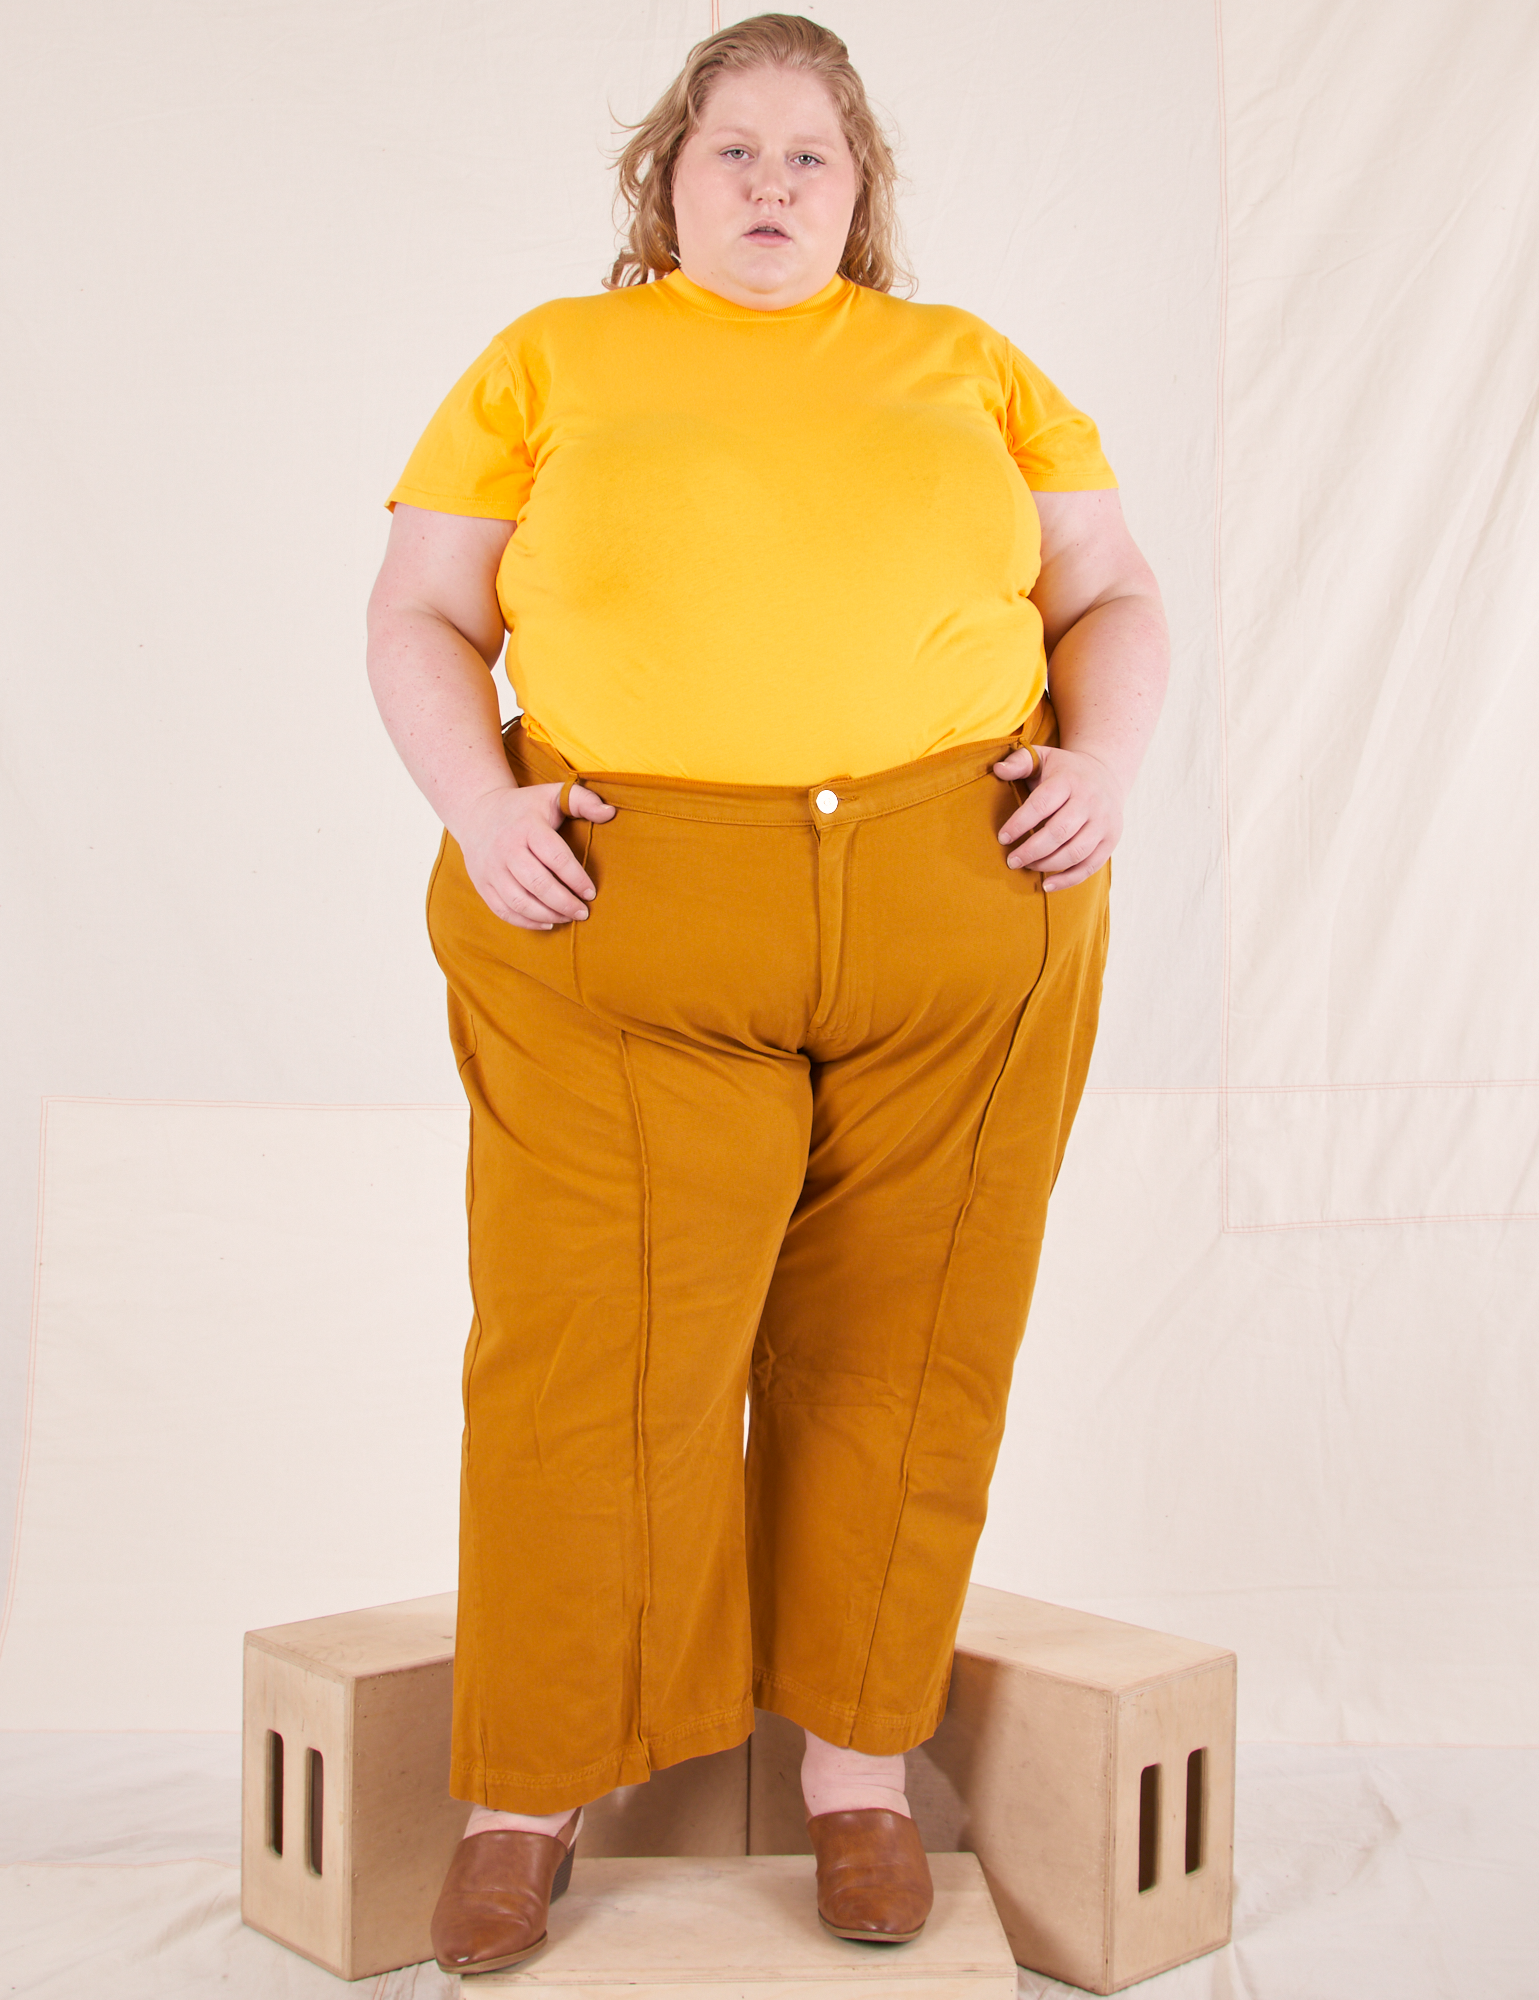 Catie is wearing 3XL Organic Vintage Tee in Sunshine Yellow paired with spicy mustard Western Pants